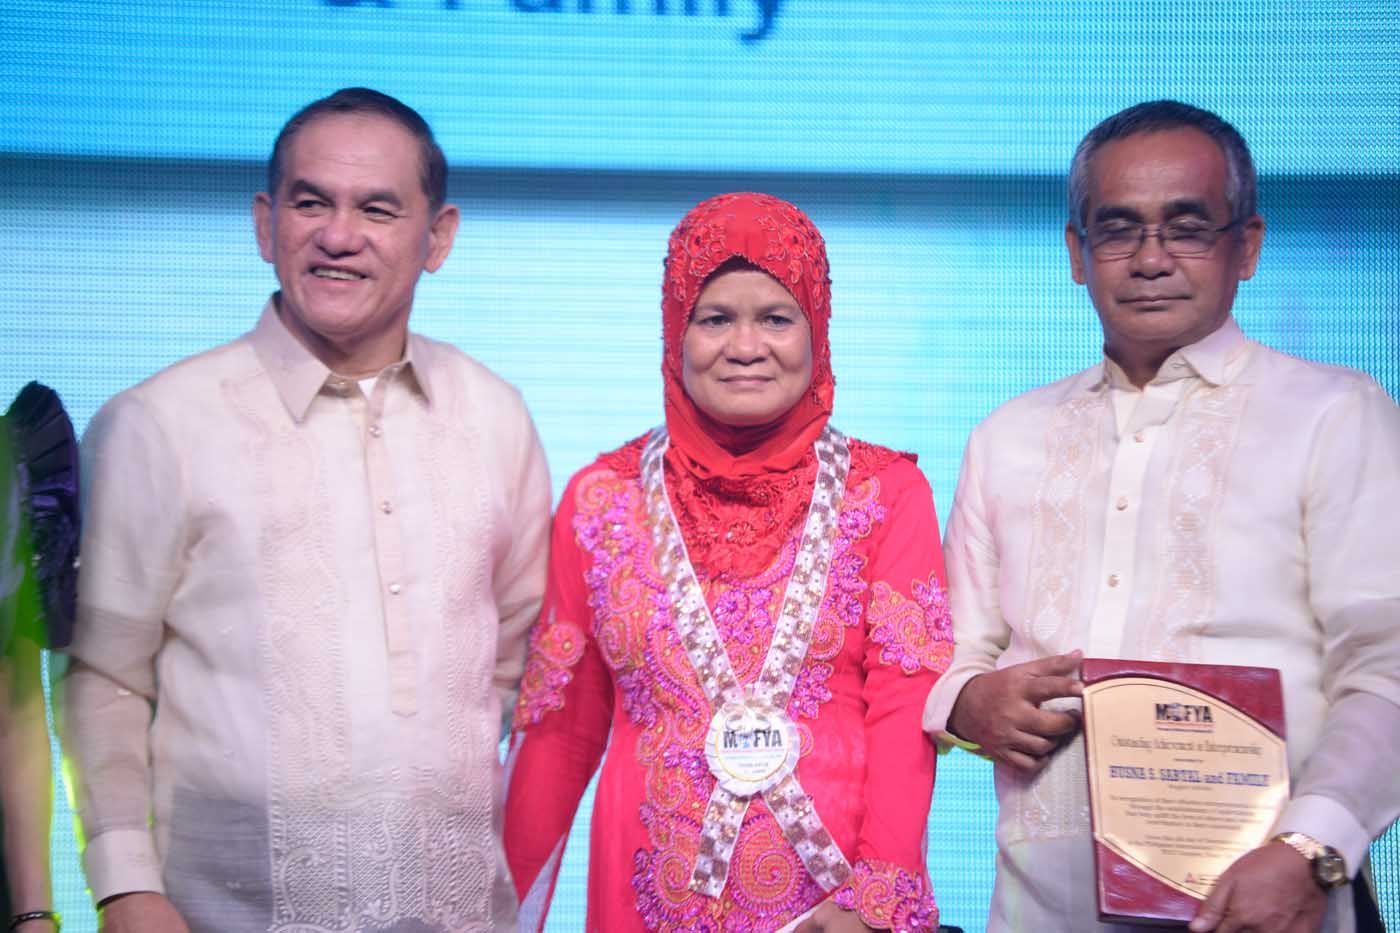 Husna Sahillu Sabtal (middle) and family receive the Outstanding Achievement in Entrepreneurship award 